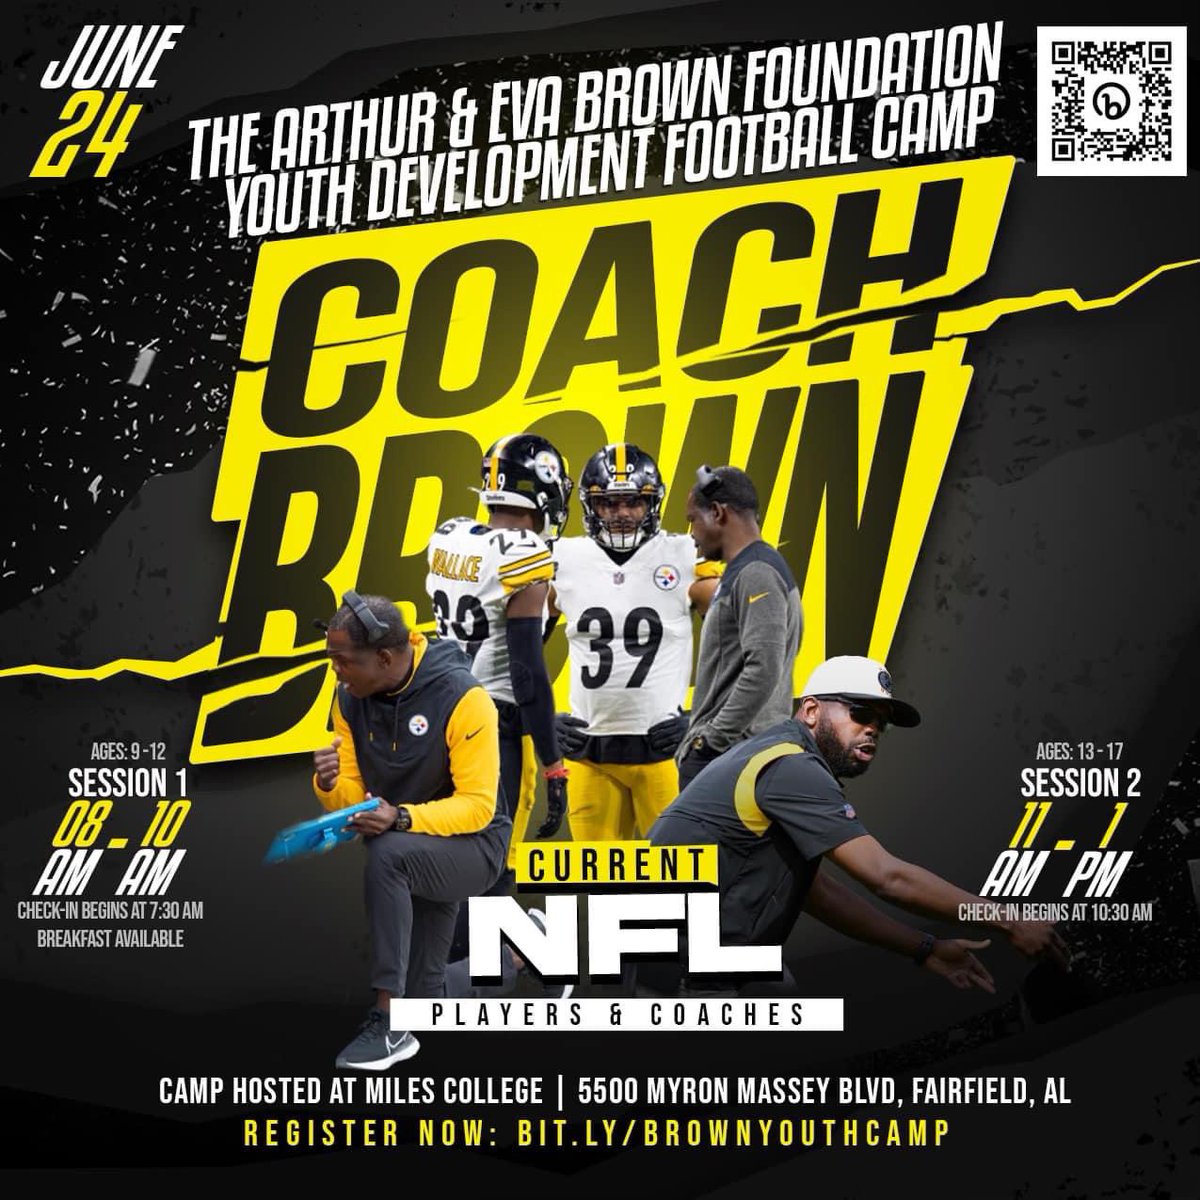 I Owe a lot to My Community, My City, and God. Can’t wait to get home and serve. We touched about 100 Lives last year. Let’s affect 300 this year. Life Messages from Guest Speakers, Expert Coaching, T-Shirt, Breakfast, Steeler Giveaways, No Cost.. See You Soon. @minkfitz_21 @P2